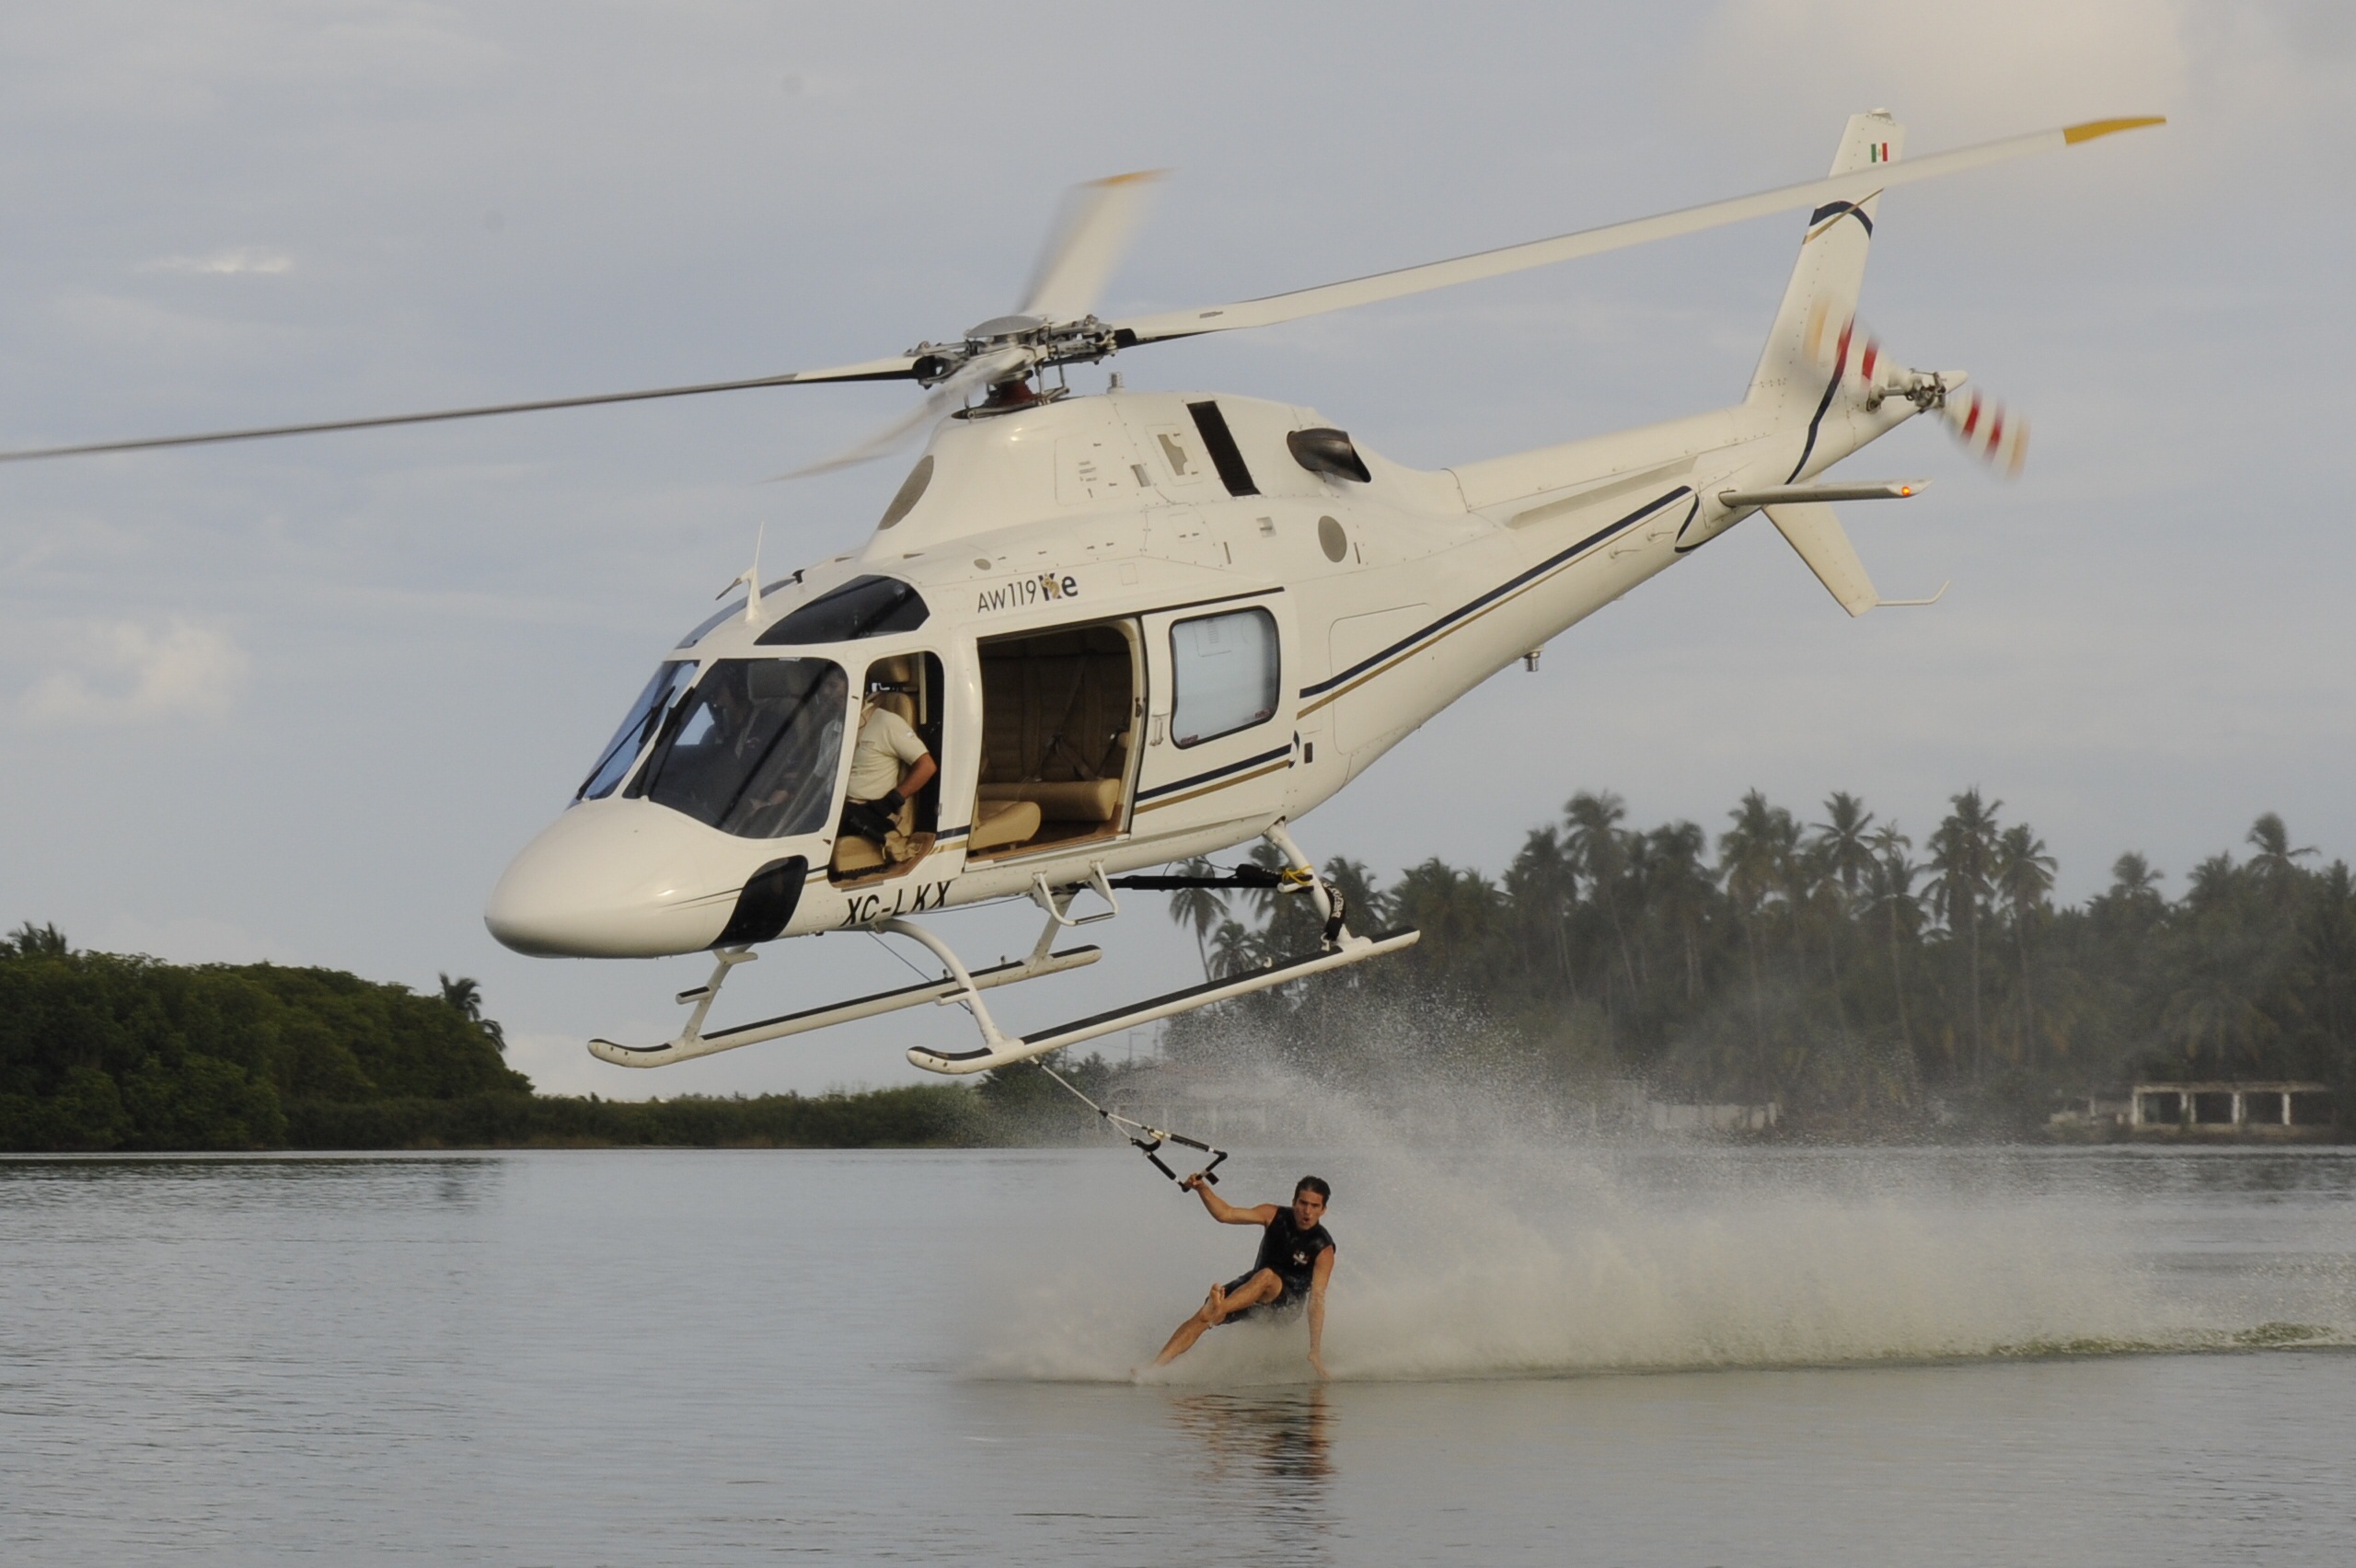 Water Skiing, Activity, Heli, Helicopter, River, HQ Photo